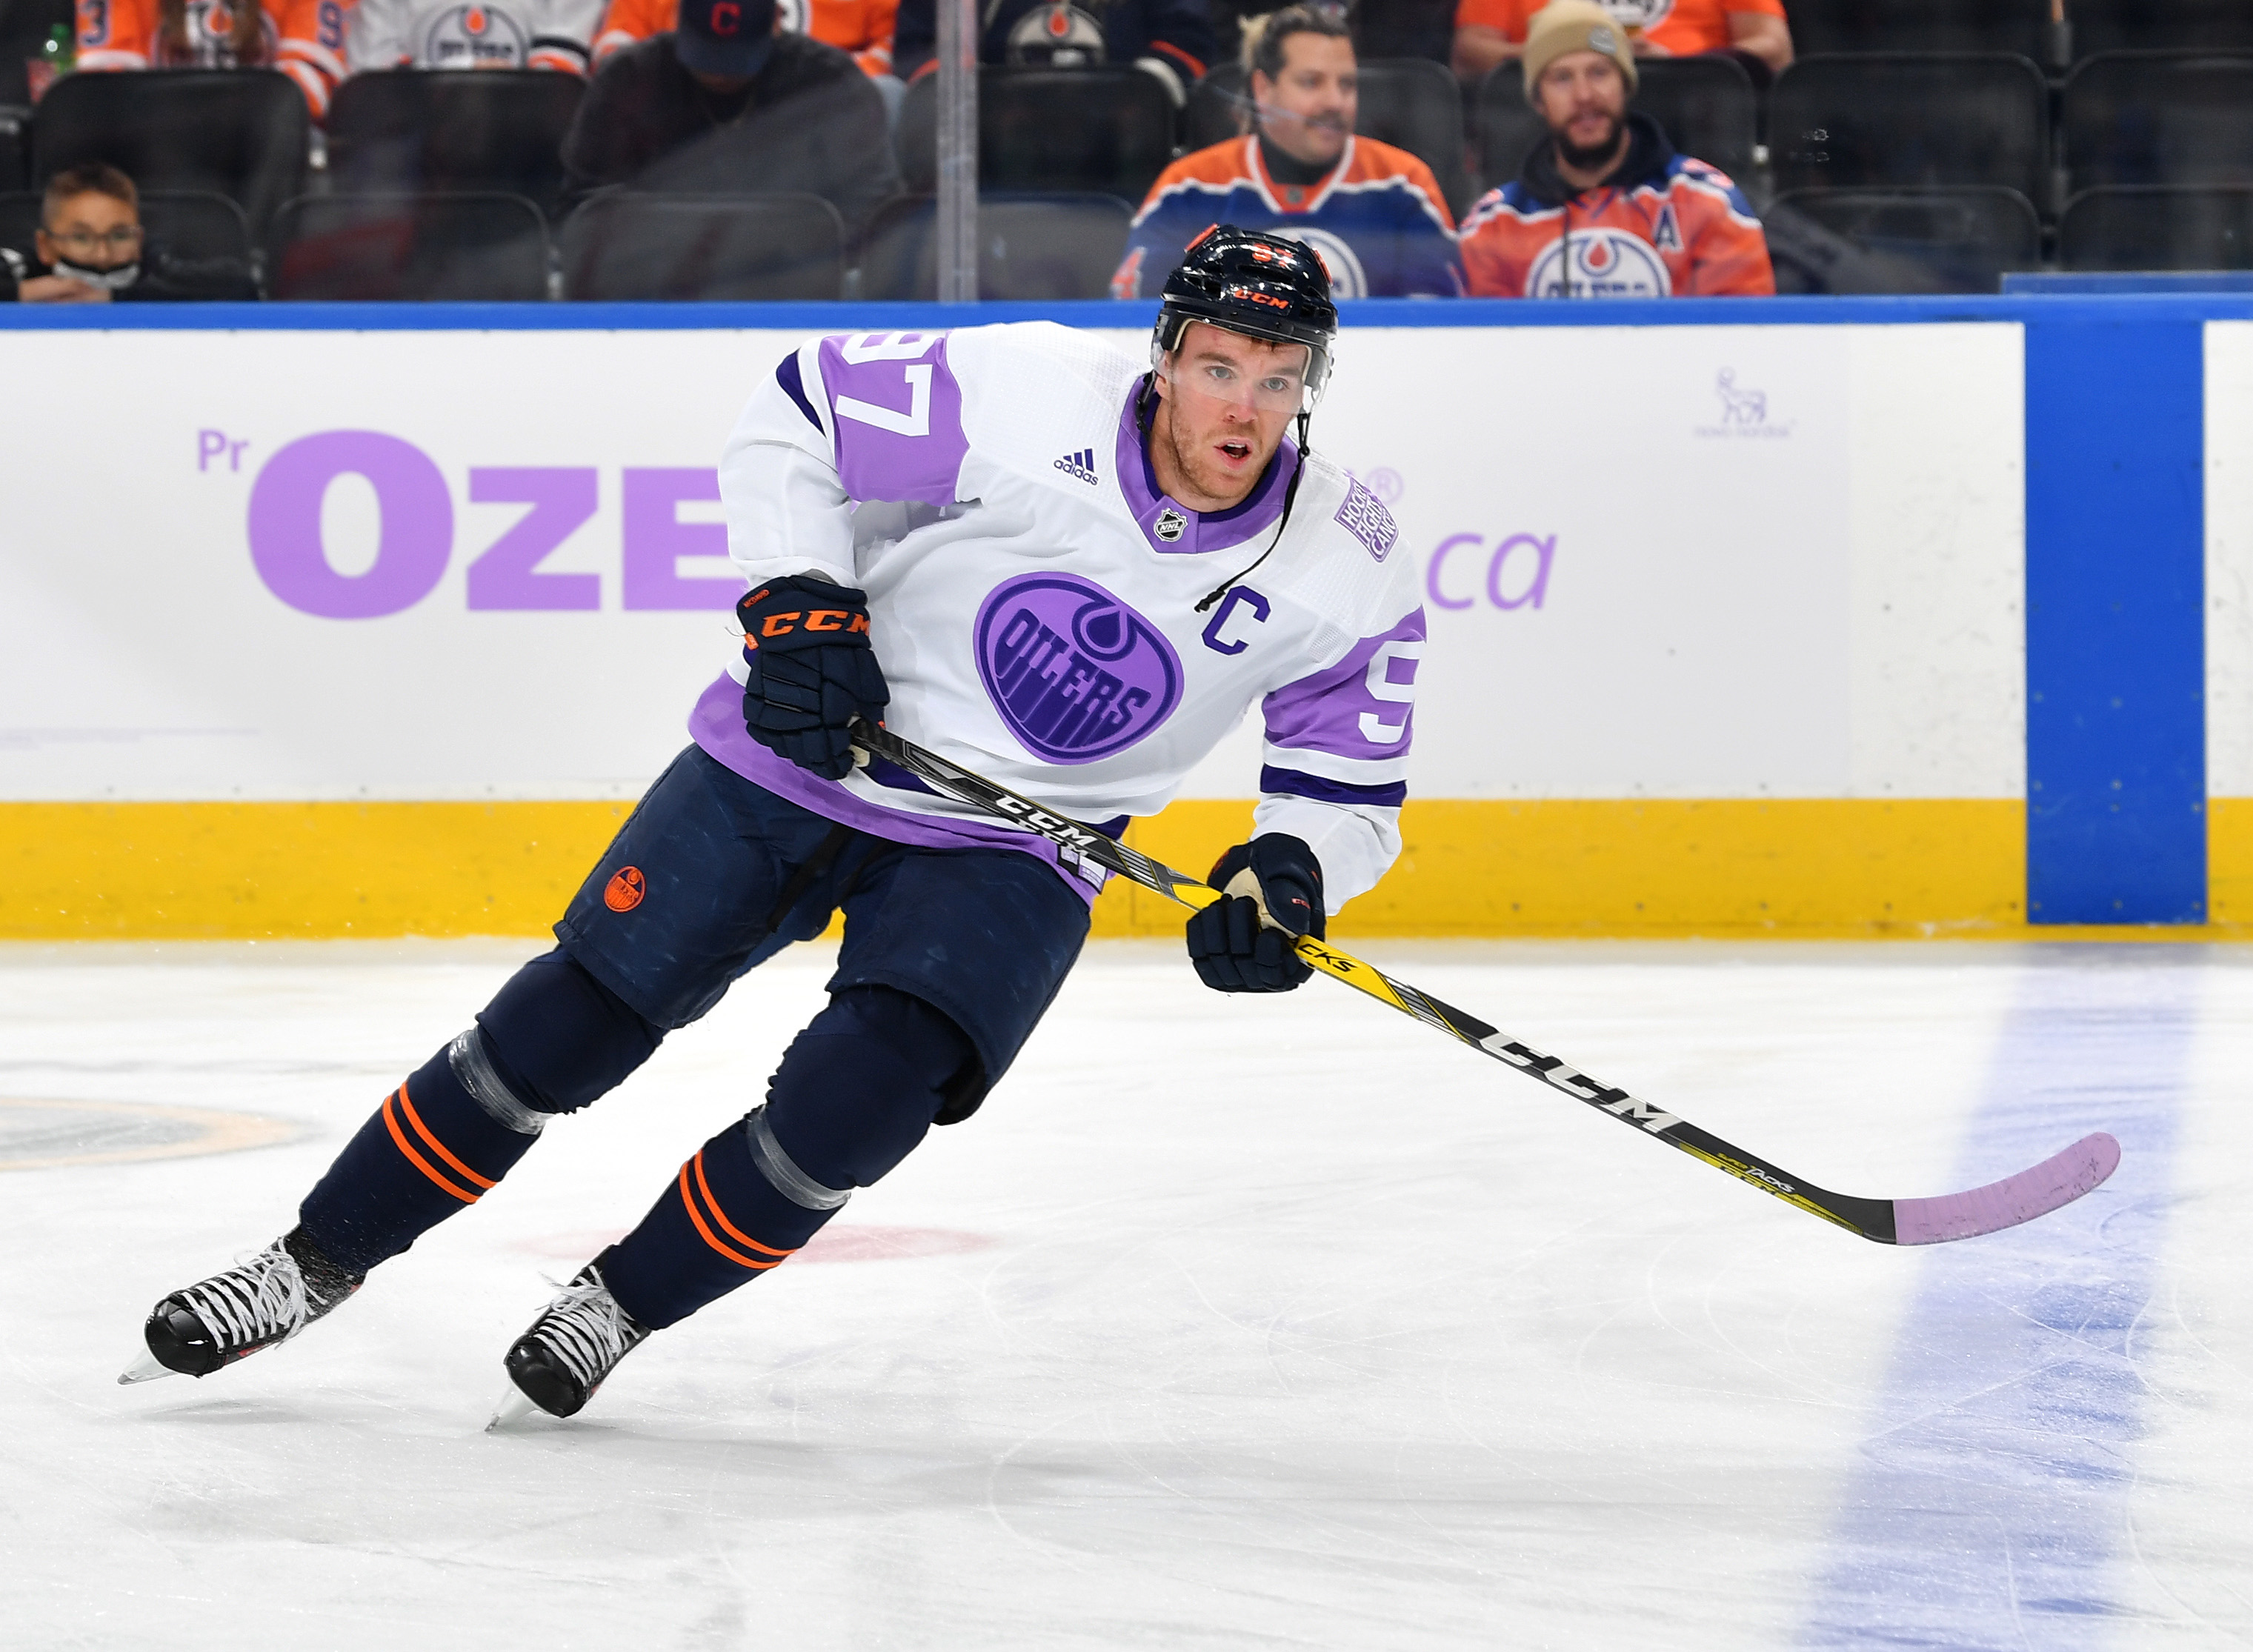 Connor McDavid #97 of the Edmonton Oilers skates during the pre-game skate wearing a Hockey Fights Cancer jersey before the game against the Chicago Blackhawks on November 20, 2021 at Rogers Place in Edmonton, Alberta, Canada.